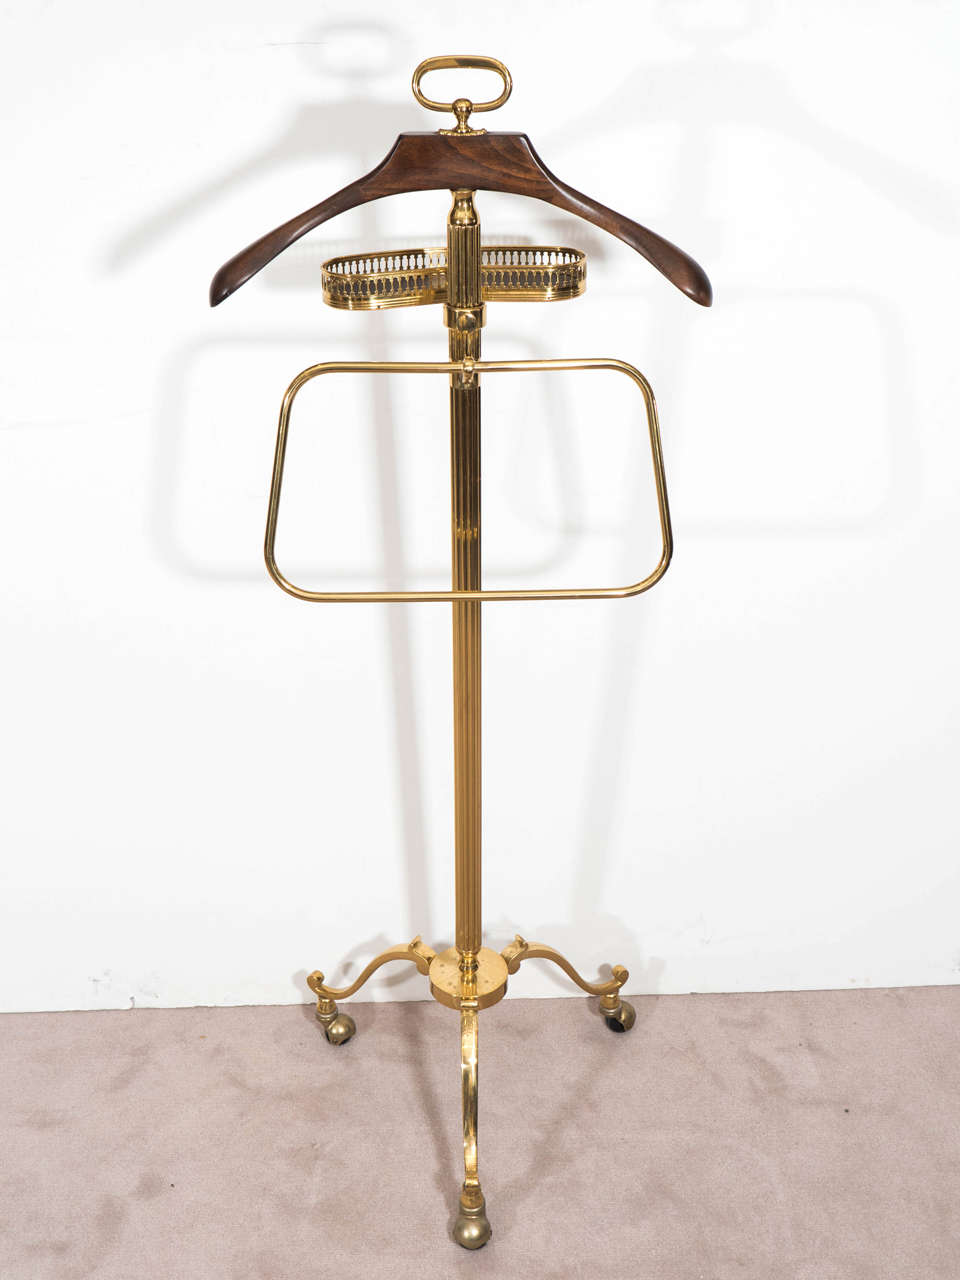 A midcentury circa 1960s Italian solid brass valet, with adjustable coin or jewelry holder with leather insert, and wooden hanger, affixed to round reeded pole on tripod base with casters. Good vintage condition with age appropriate wear.